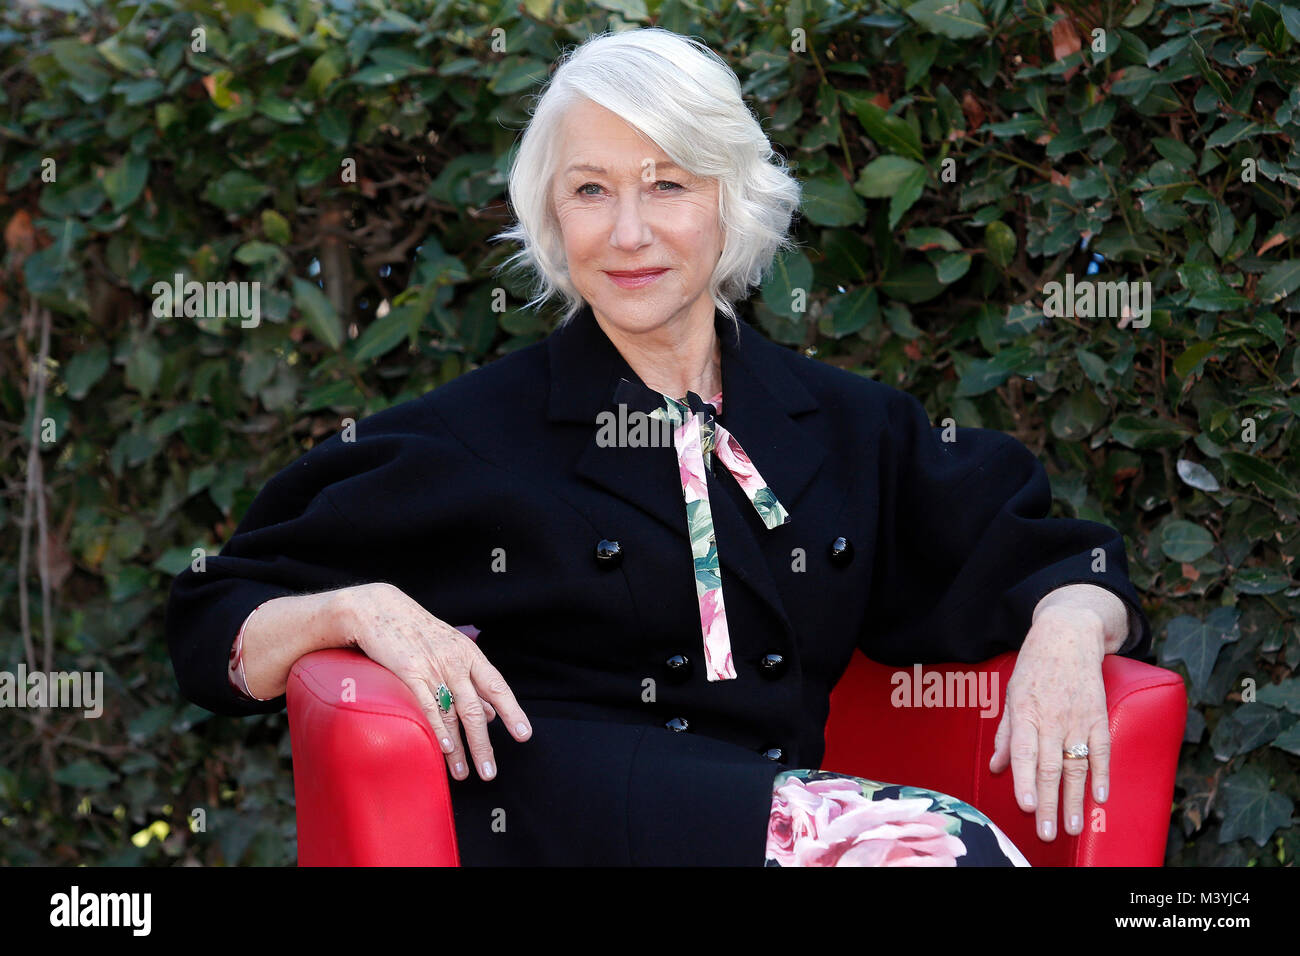 Rome, Italy. 13th February, 2018. Helen Mirren  Roma 13/02/2018. Photocall del film 'La vedova Winchester' Rome February 13th 2018. Actress Helen Mirren poses for photographers during the photocall for the film 'Winchester - The House That Ghosts Built' Foto Samantha Zucchi Insidefoto Credit: insidefoto srl/Alamy Live News Stock Photo